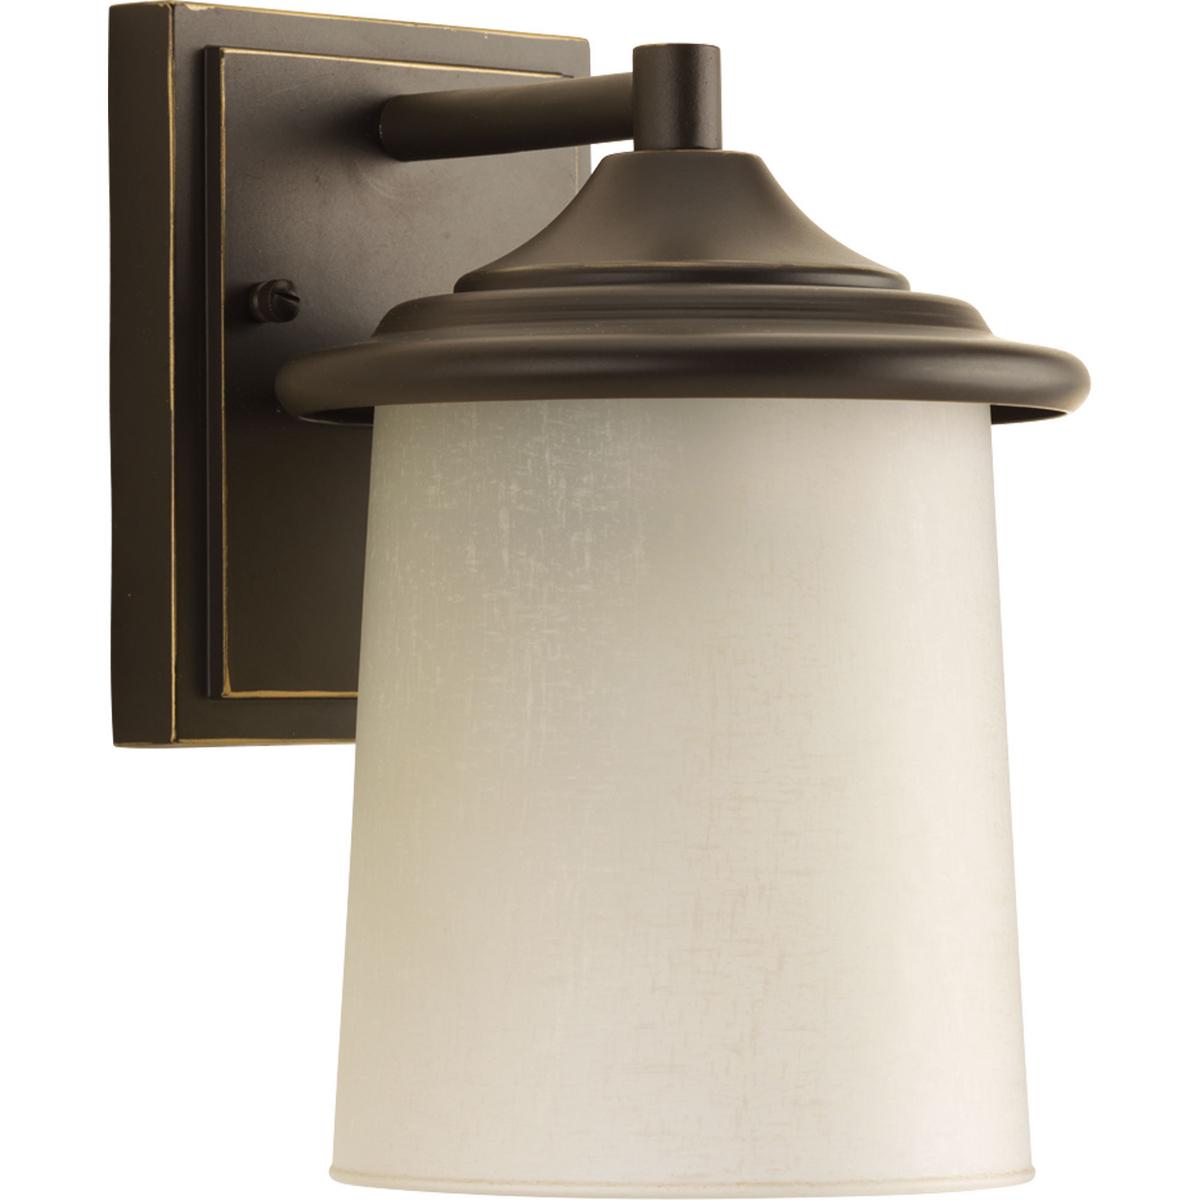 Hubbell P6059-20 Outdoor one-light small wall lantern with an etched umber linen glass shade in an Antique Bronze finish.  ; Antique Bronze finish. ; Etched umber linen glass. ; Powdercoat finish.